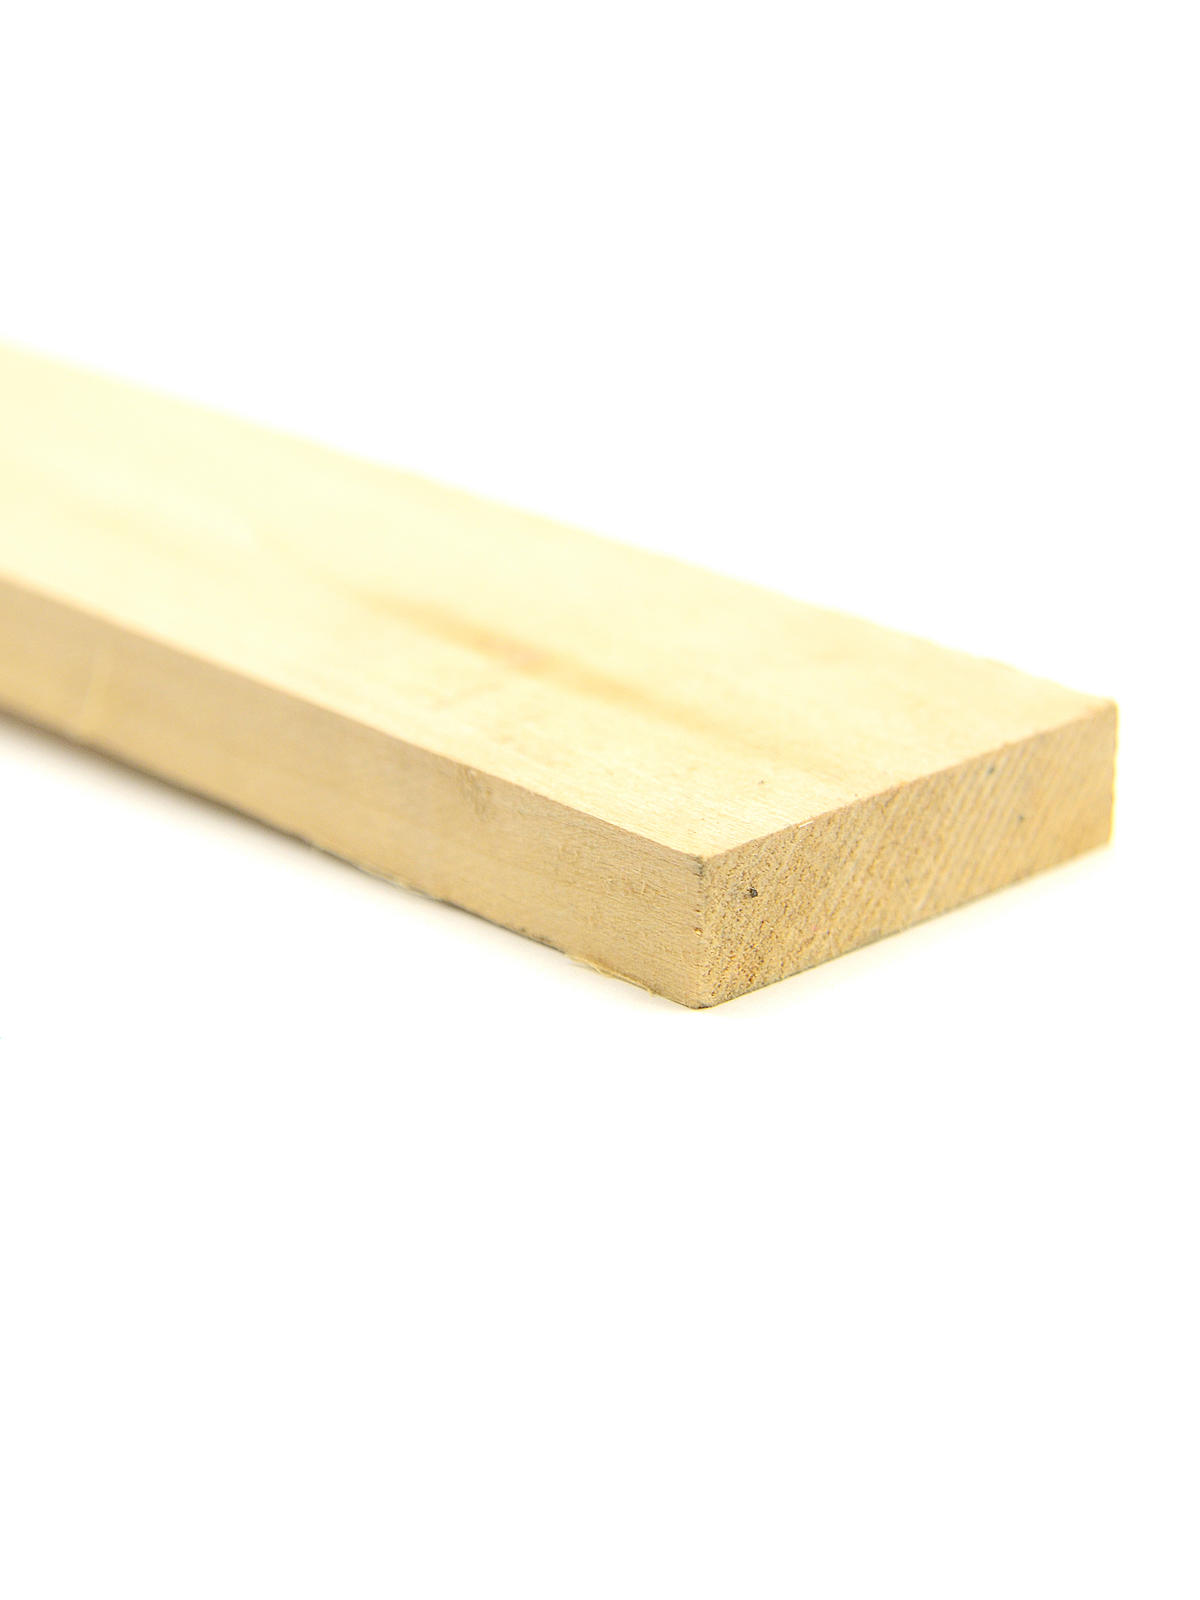 Basswood Sheets 1 2 In. 2 In. X 24 In.